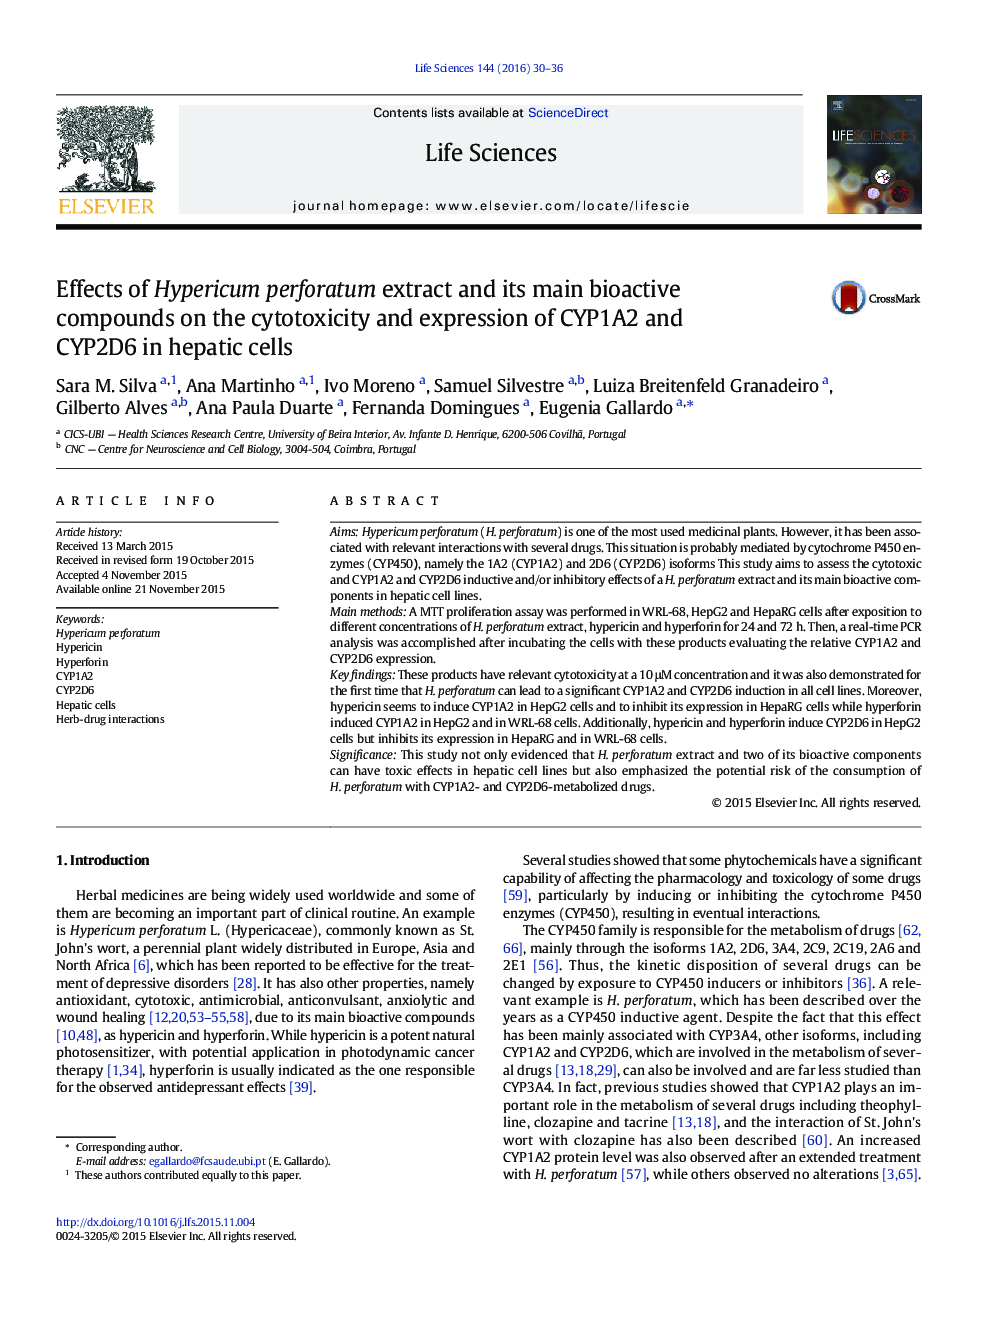 Effects of Hypericum perforatum extract and its main bioactive compounds on the cytotoxicity and expression of CYP1A2 and CYP2D6 in hepatic cells